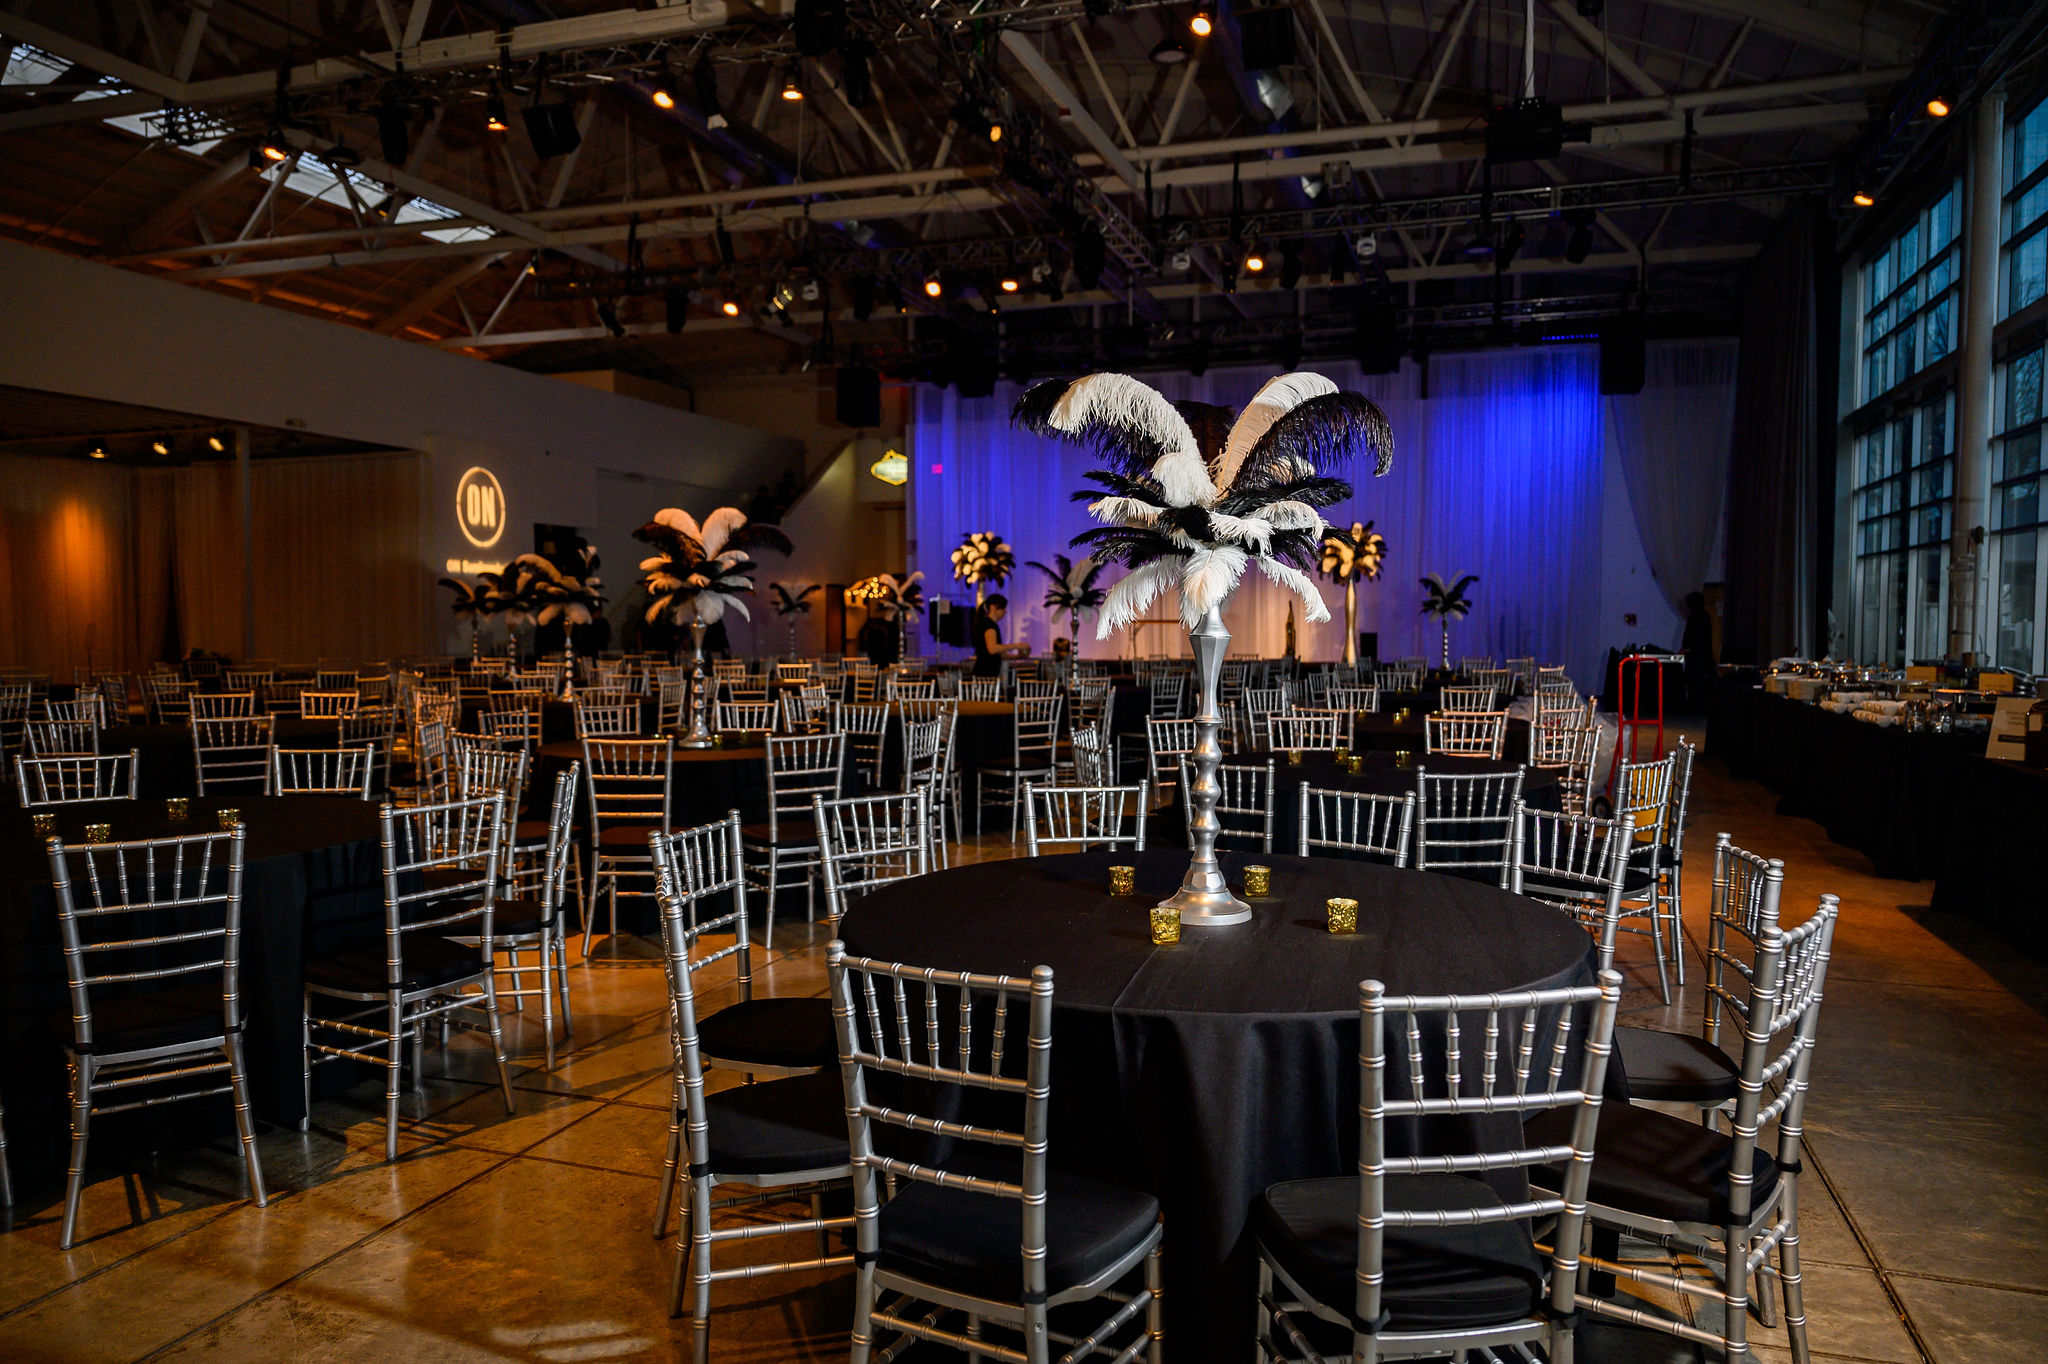 Corporate event space with black and white decorations